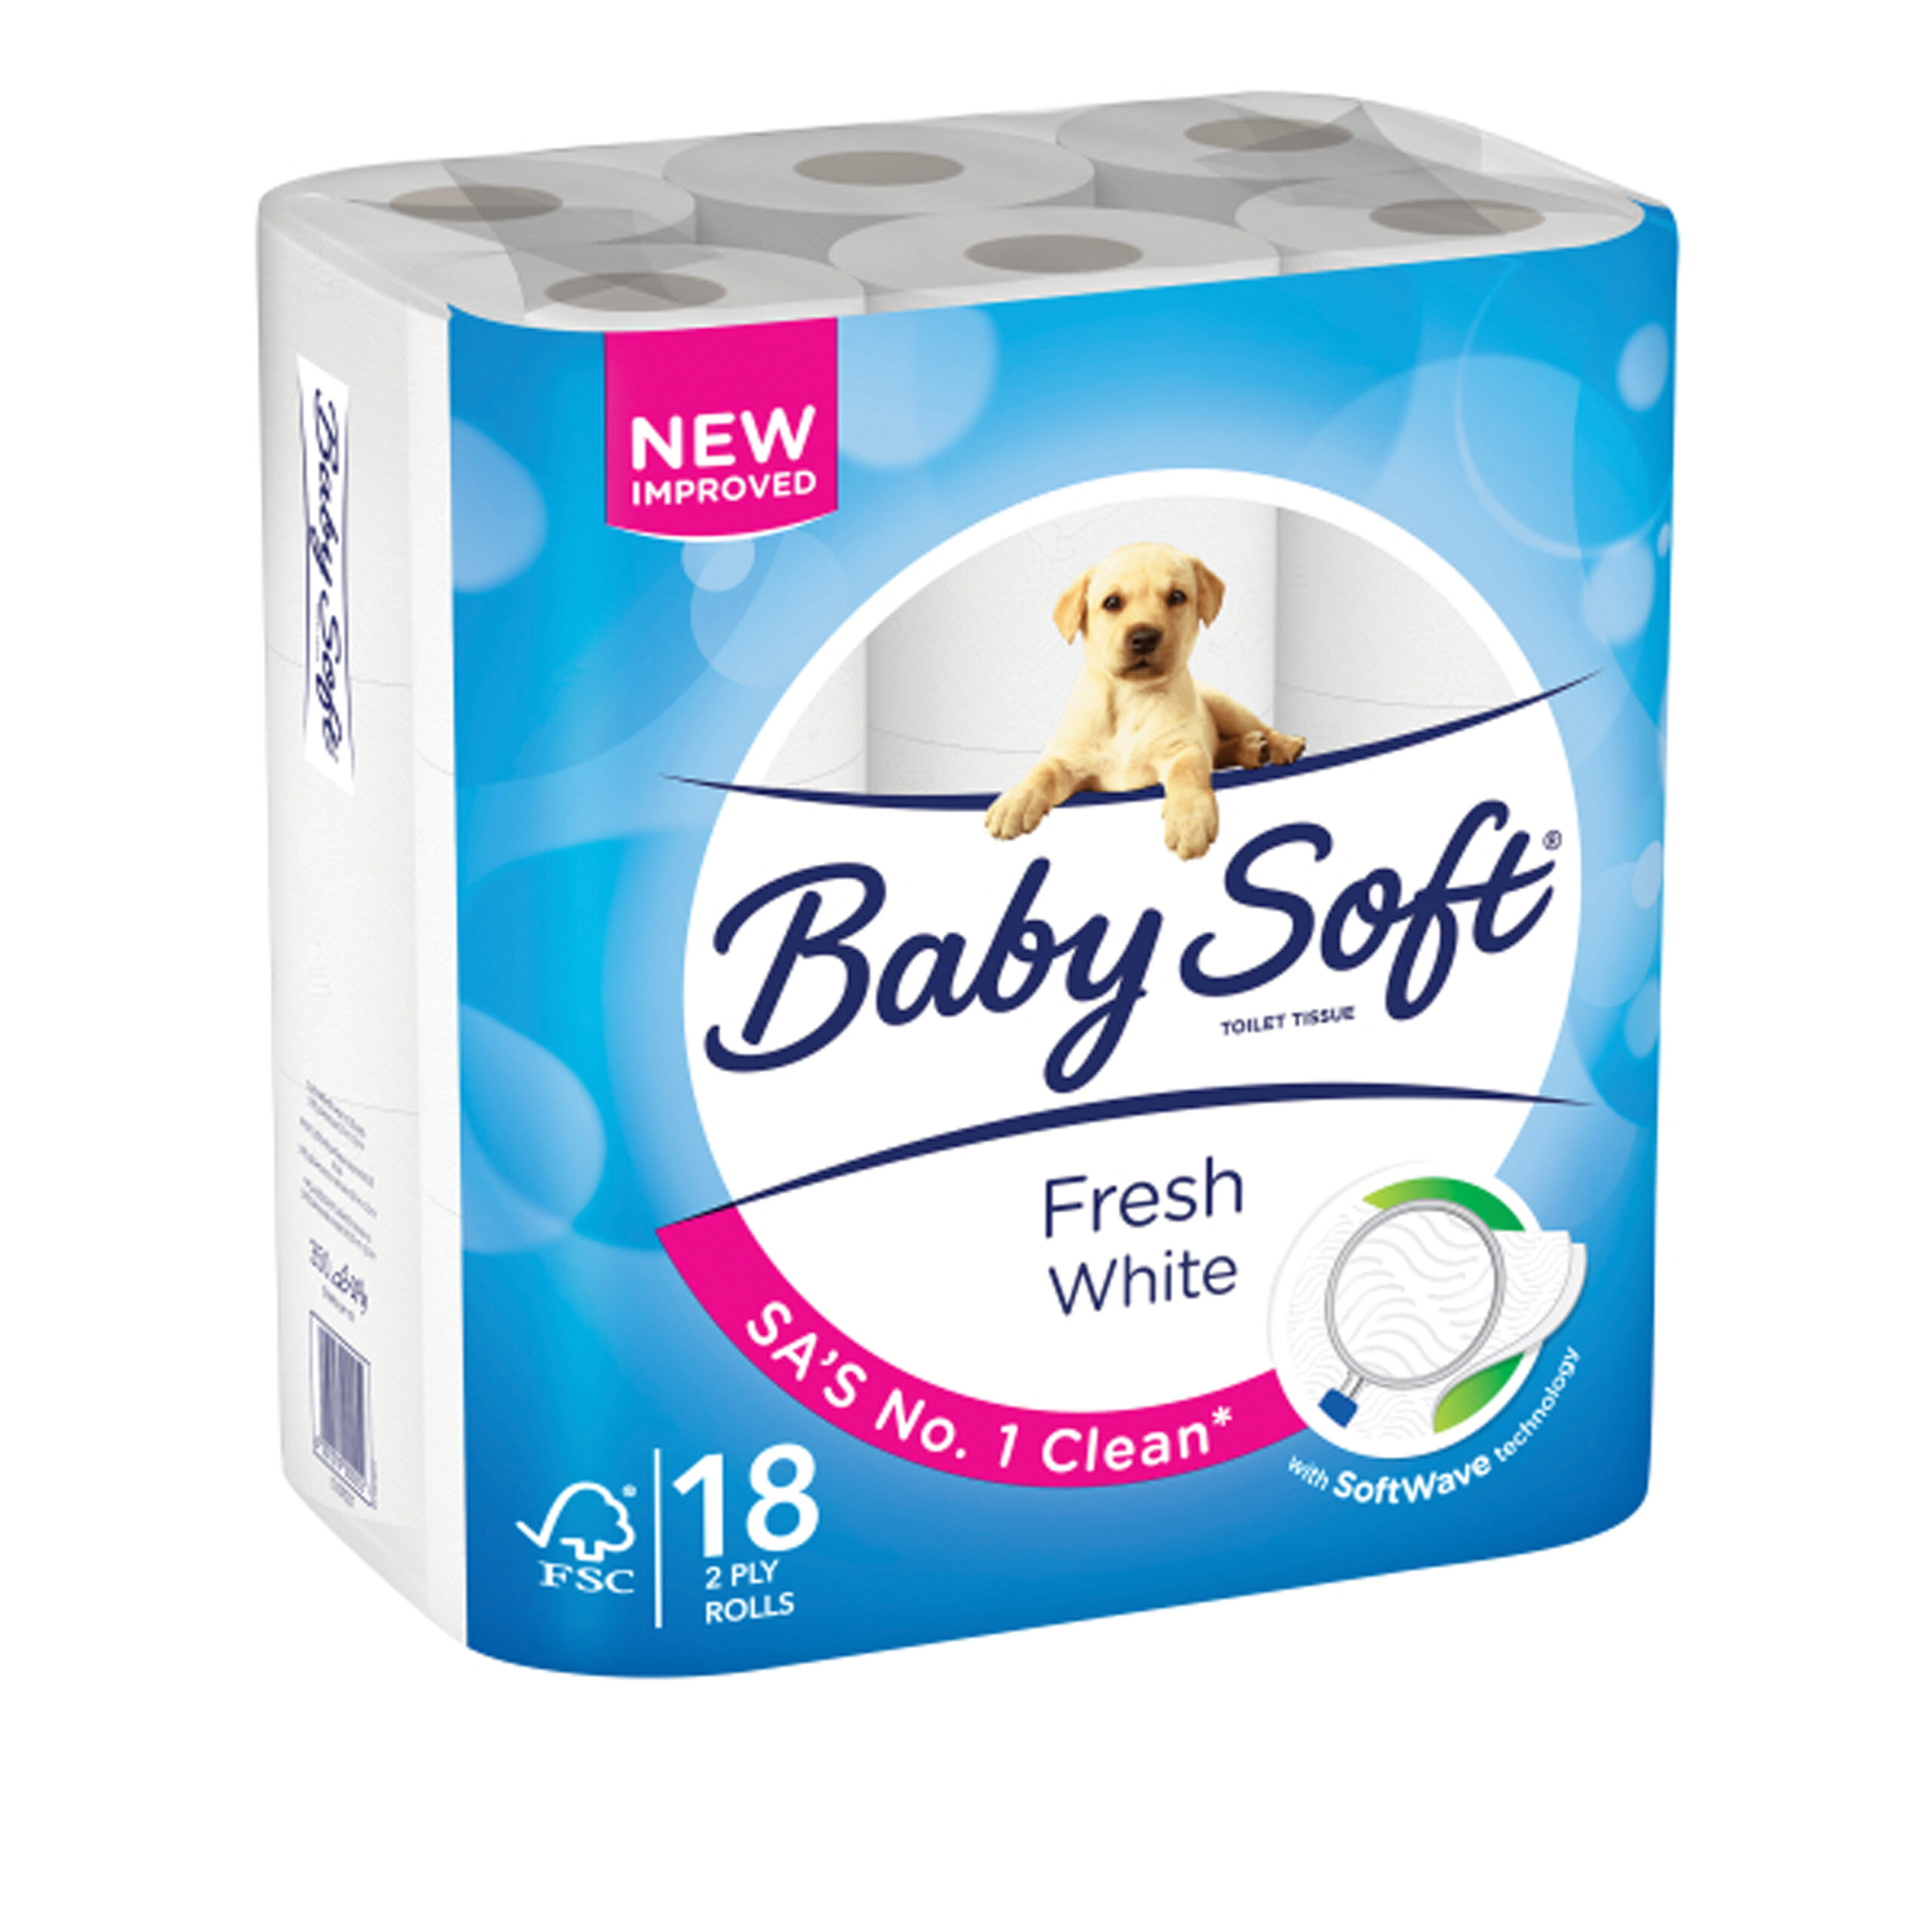 BABY SOFT TOILET
ROLL WHITE 2 PLY
350 SHEETS 18's